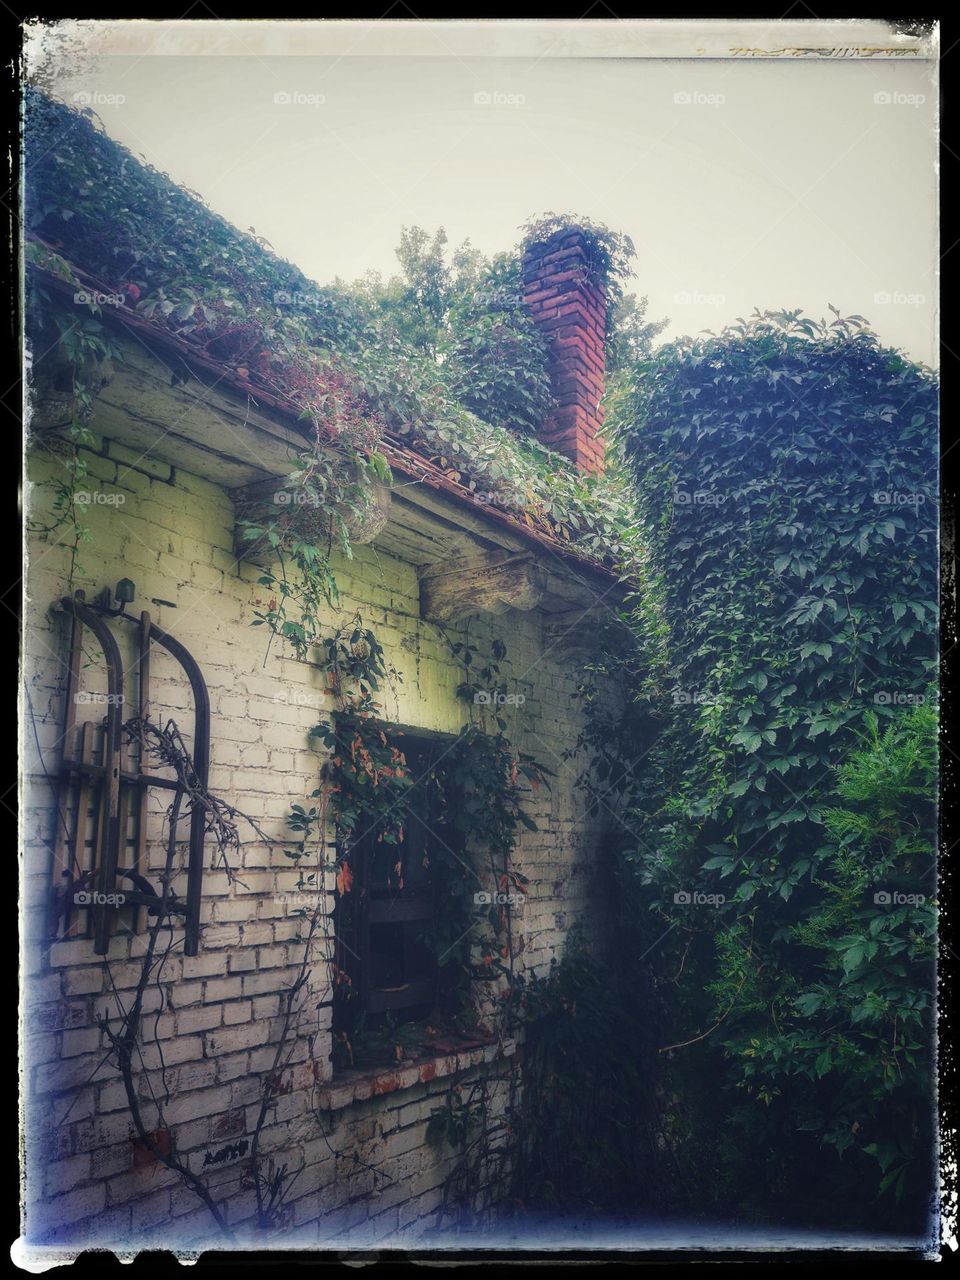 An old house overgrown with greenery